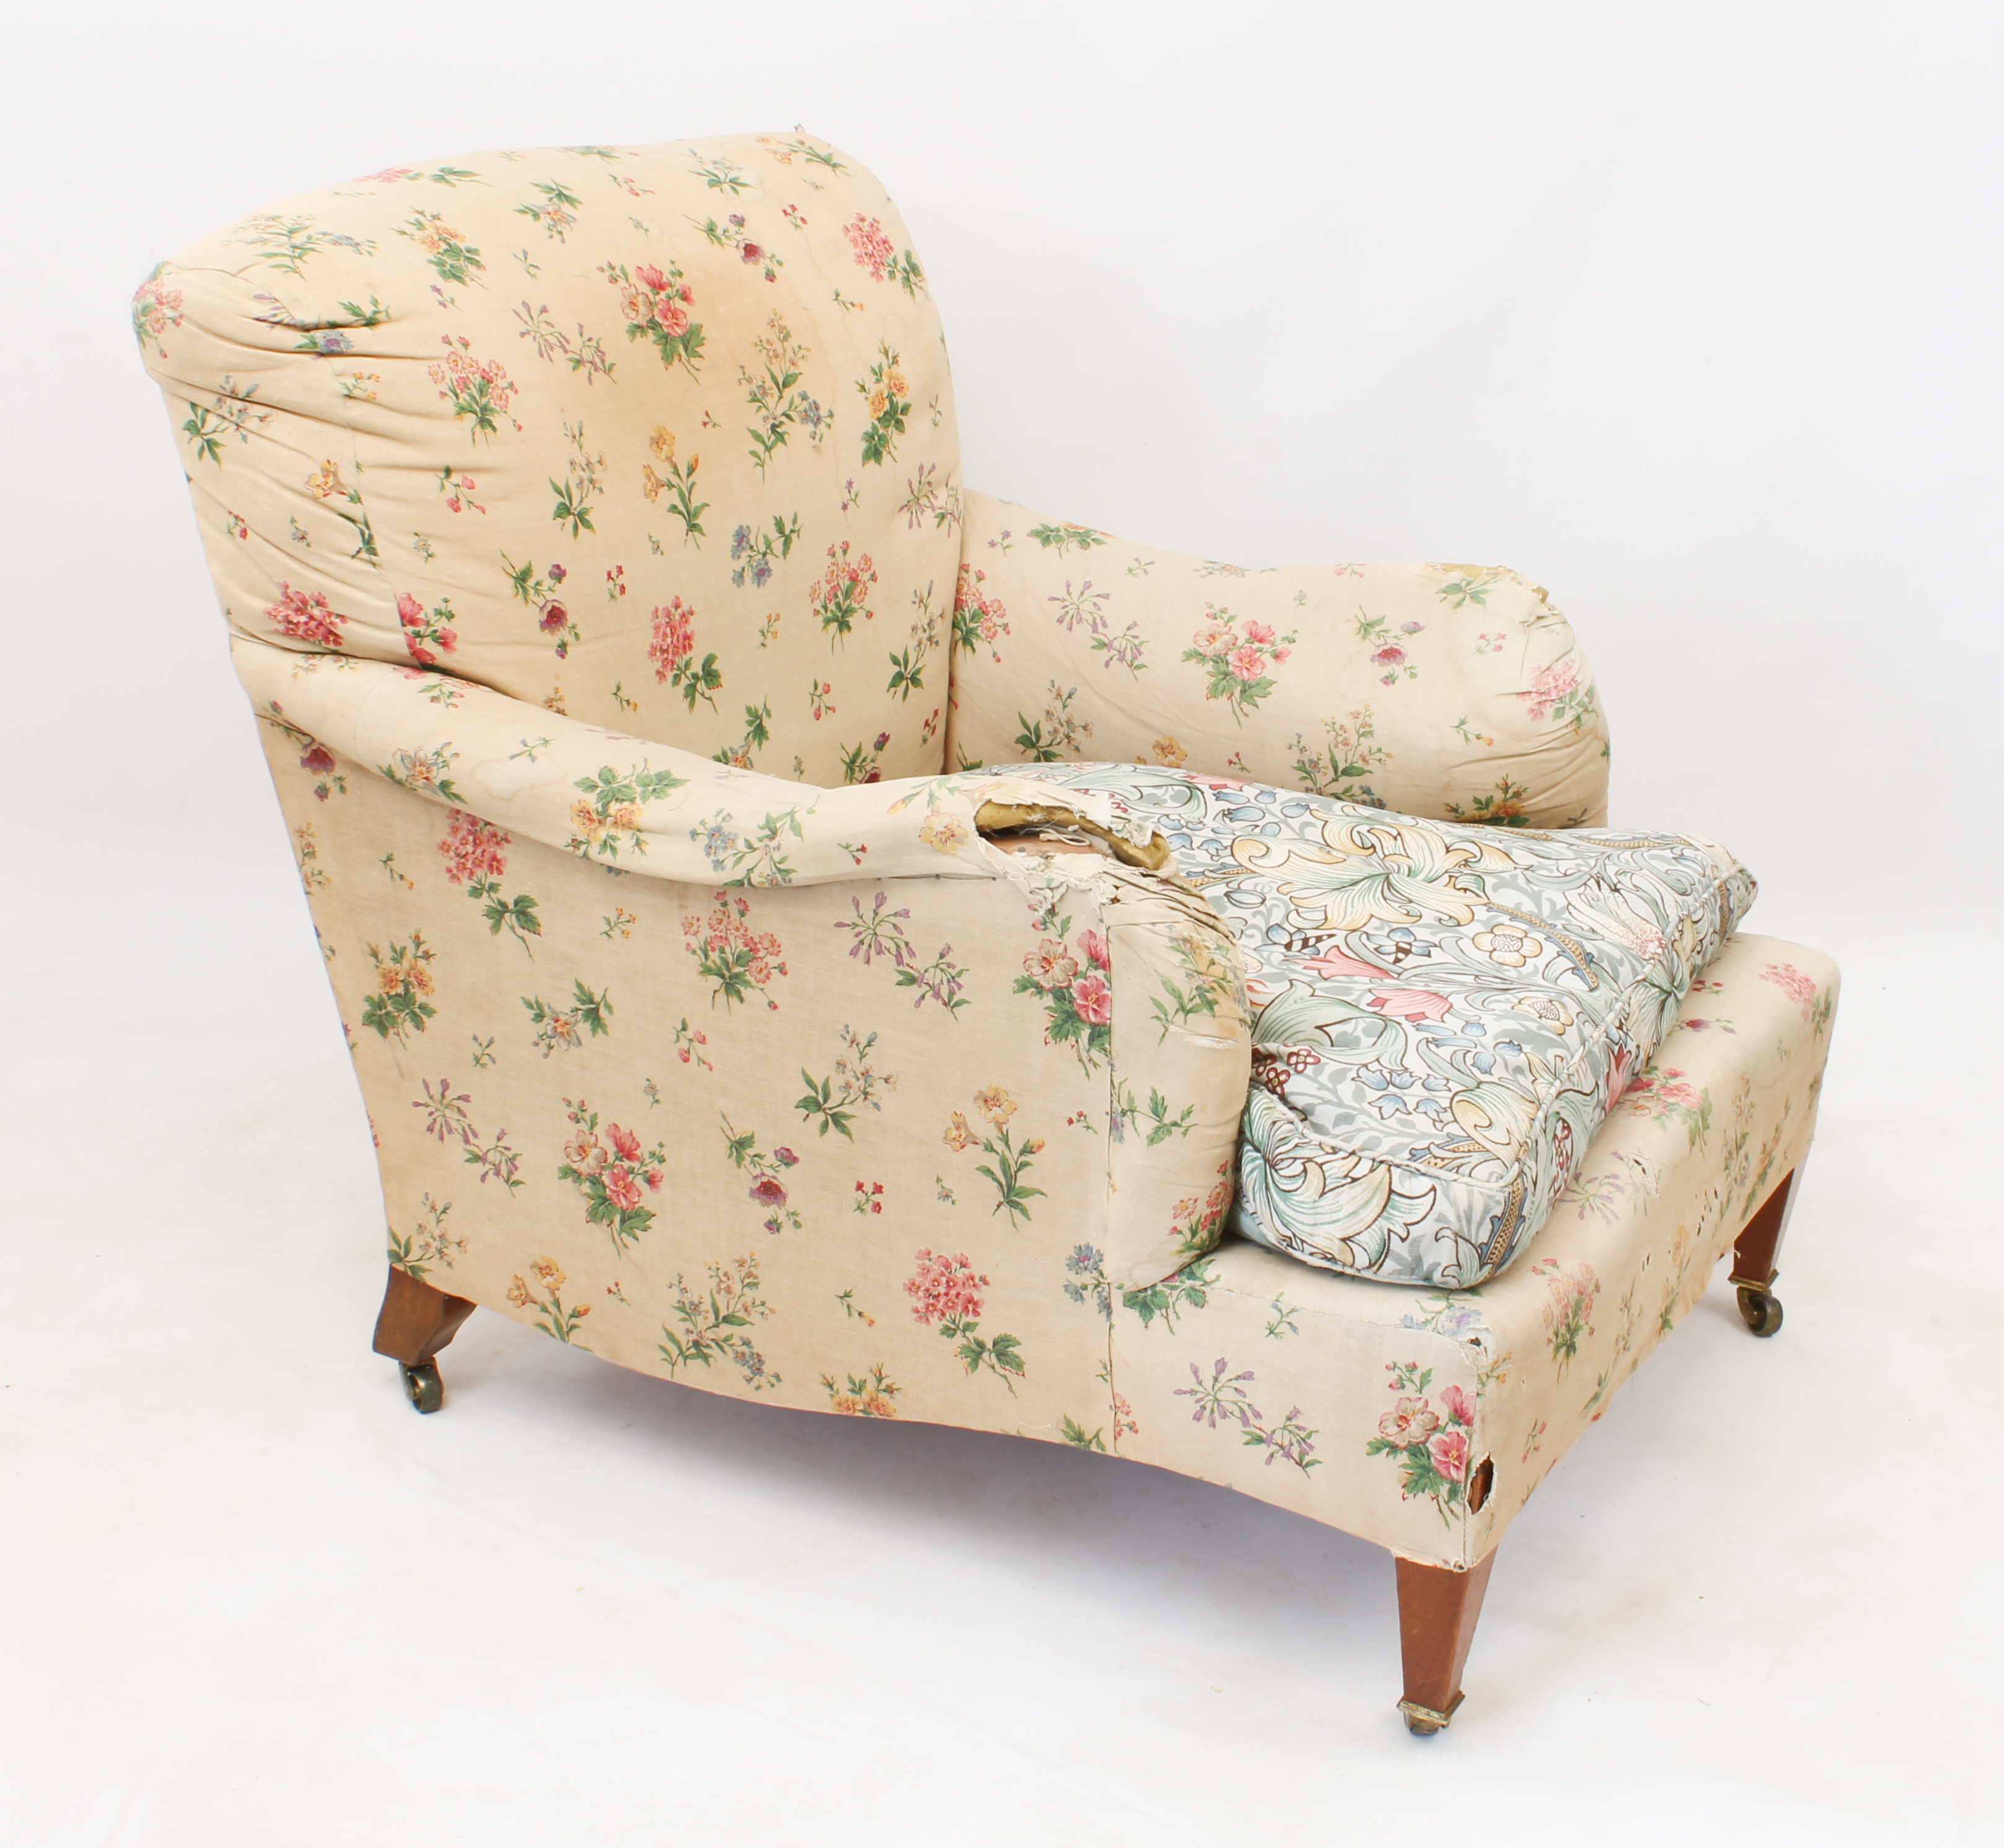 An early 20th century armchair by Howard & Sons - upholstered in early 20th century printed floral